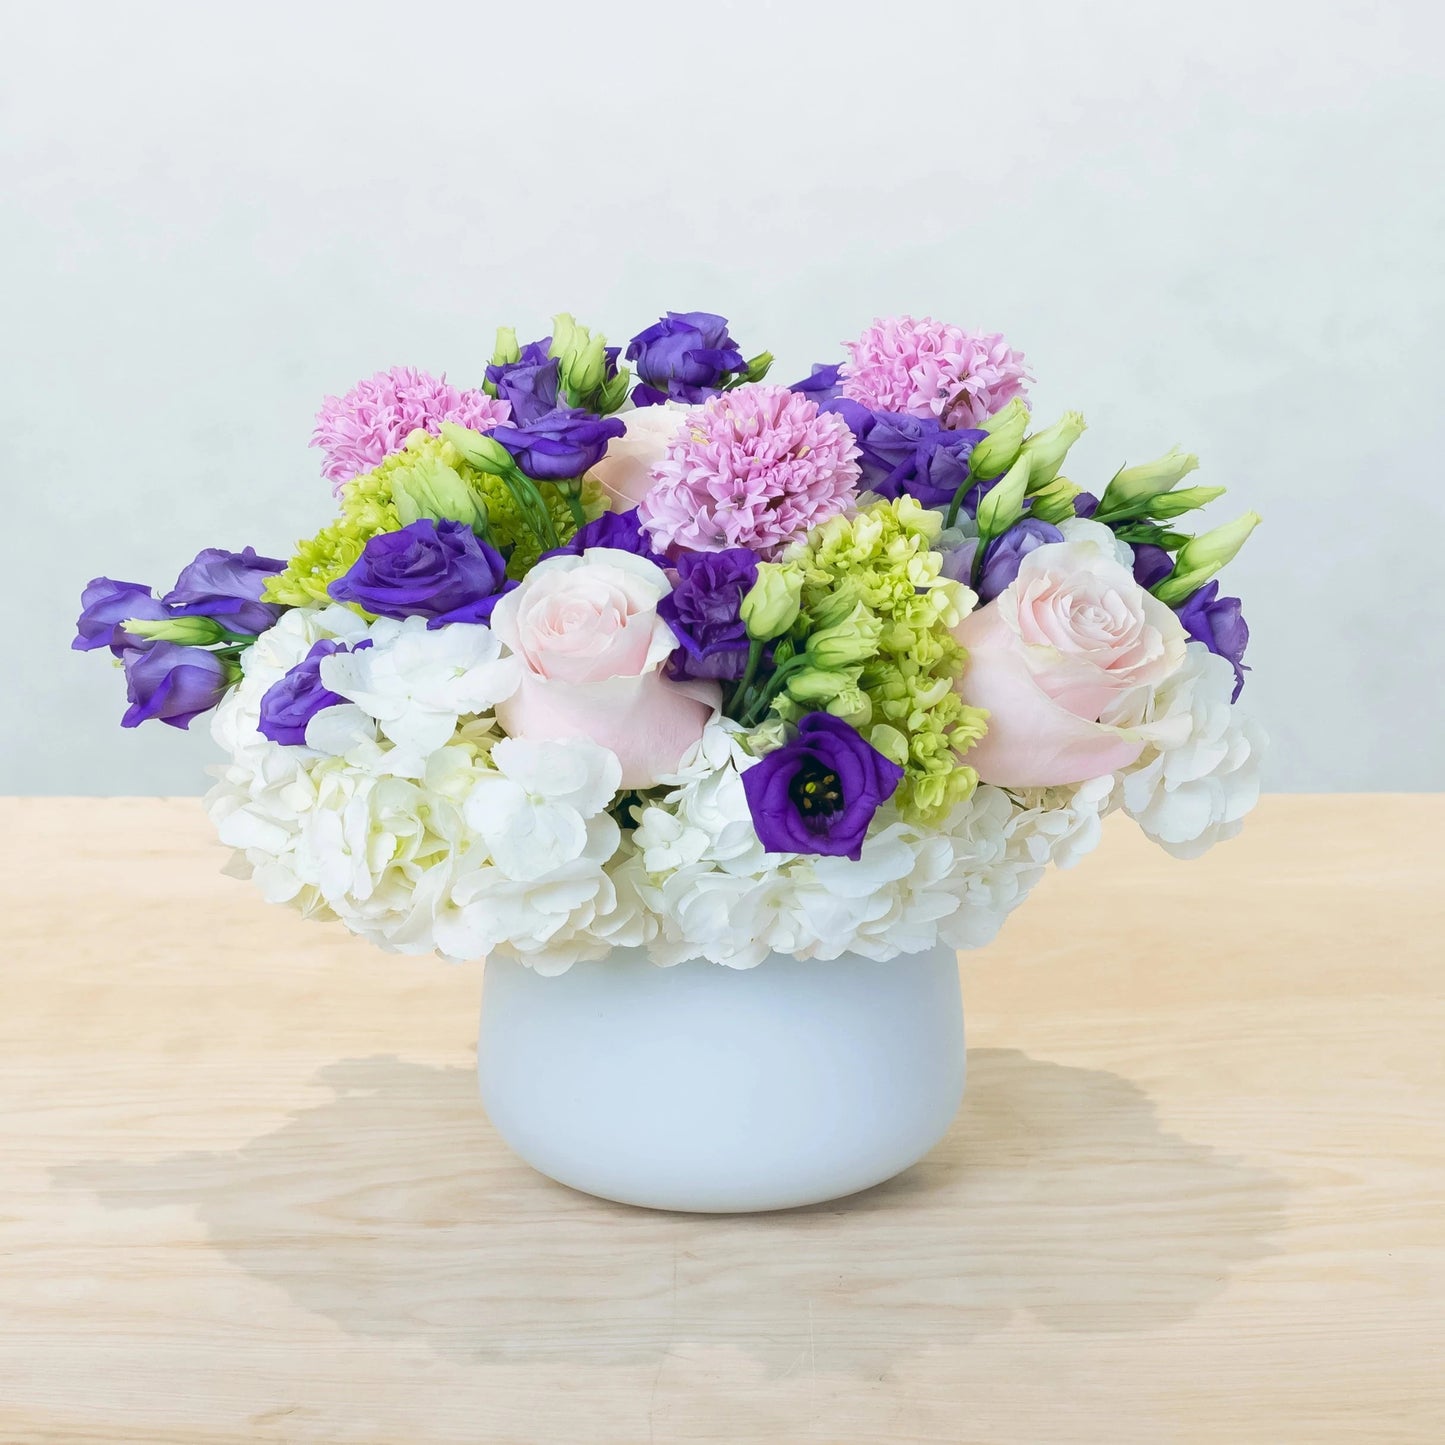 Purples, lavenders, and whites in a gentle, elegant blend. Purple lisianthus and hyacinth complement white hydrangea and light pink roses. Suitable for a variety of events!